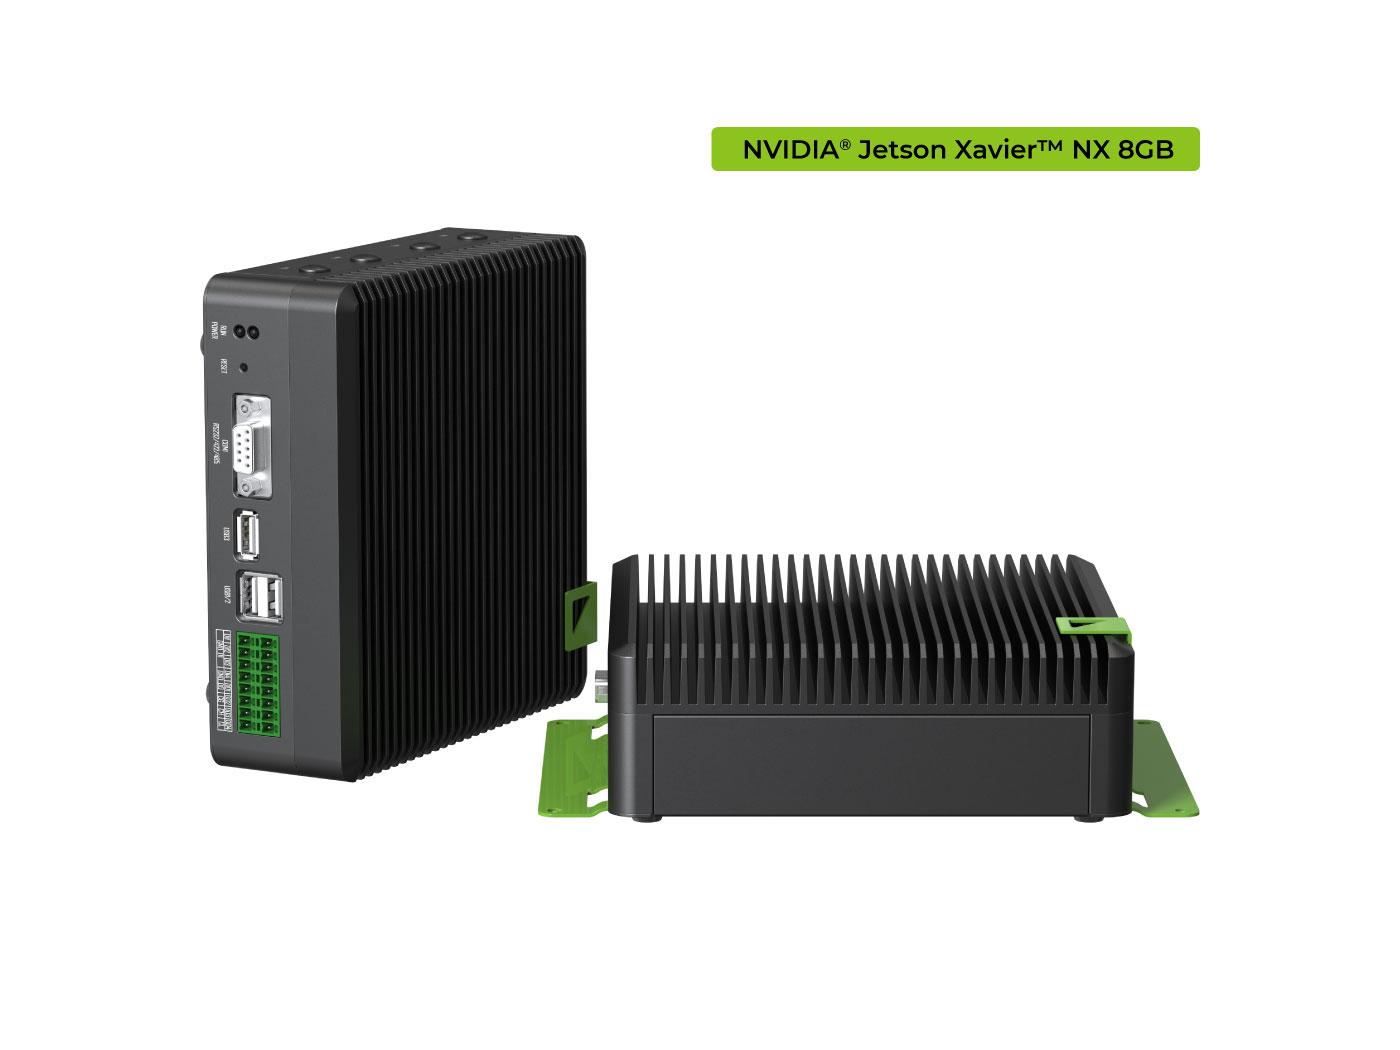 [110110188]reComputer?Industrial?J2011- Fanless Edge AI Device with Jetson Xavier NX 8GB module, Aluminum case with passive cooling, 2xRJ45 GbE, 1xRS232/RS-422/RS-485, 4xDI/DO, 1xCAN, 3xUSB3.2, Pre-installed Jet